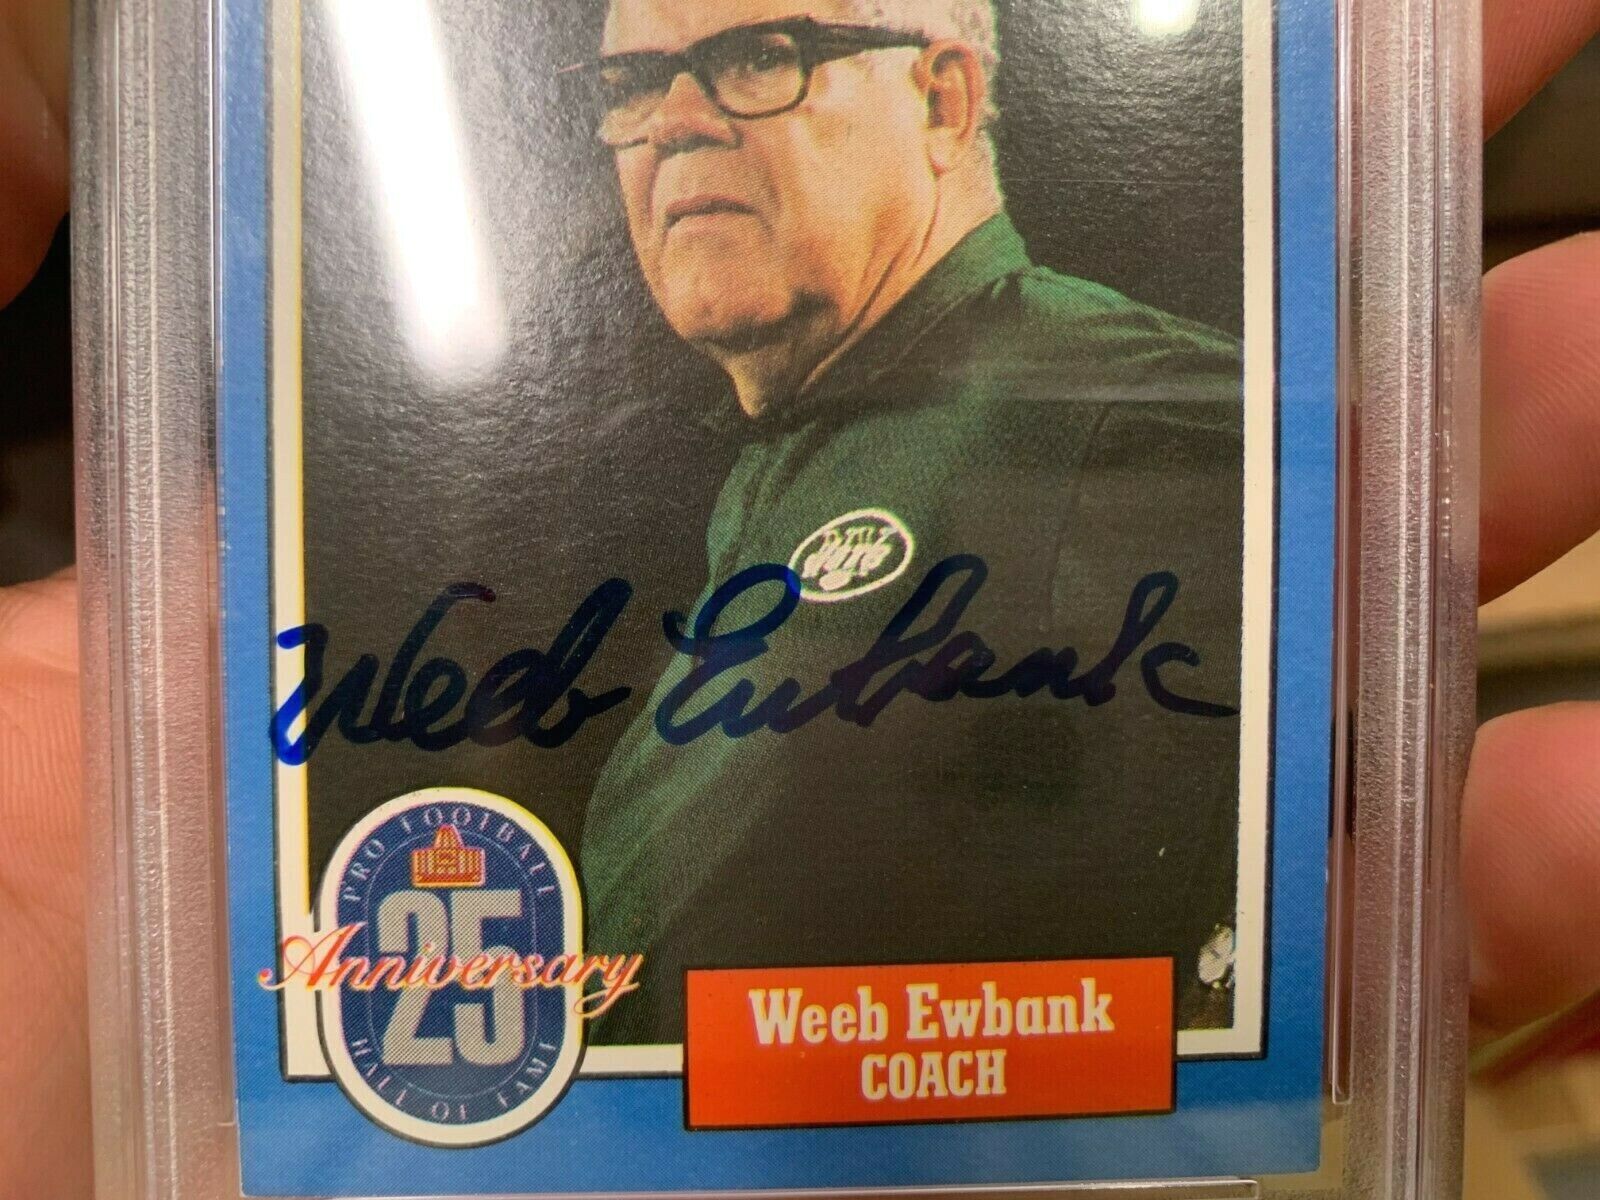 Weeb Ewbank HOF Jets Coach Autographed Signed Swell Card PSA Certified Slabbed